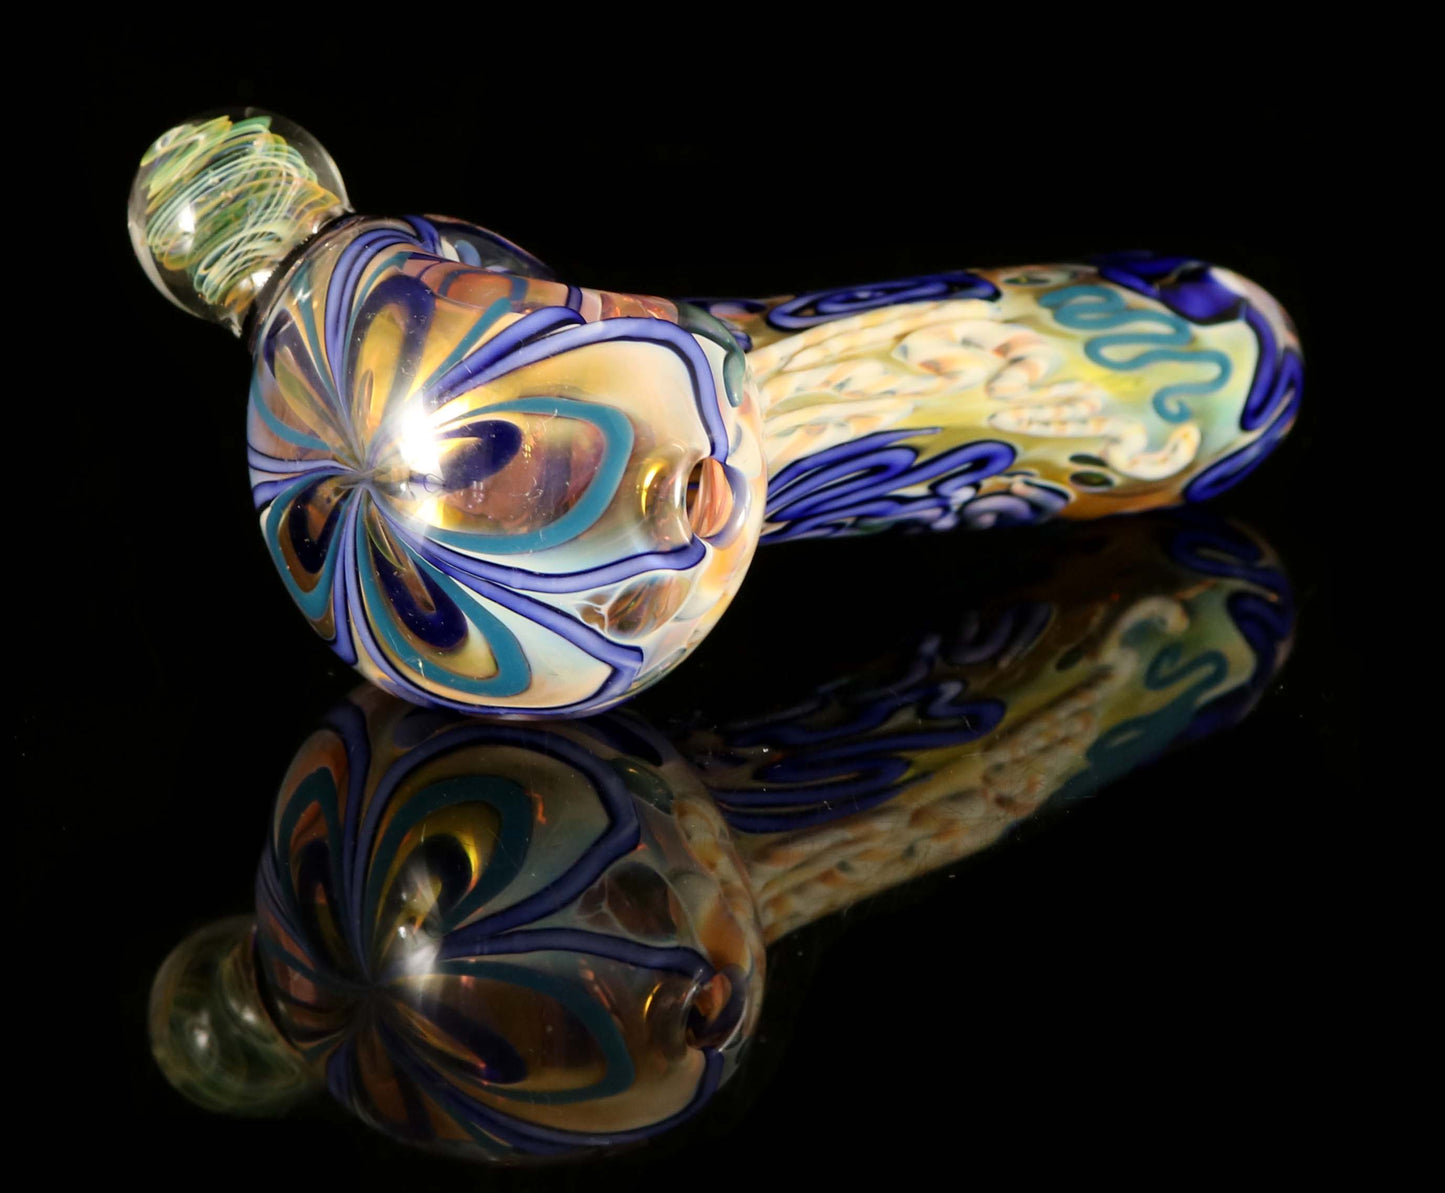 Xtra Thick Dry Hand Pipe by, Phil_PGW